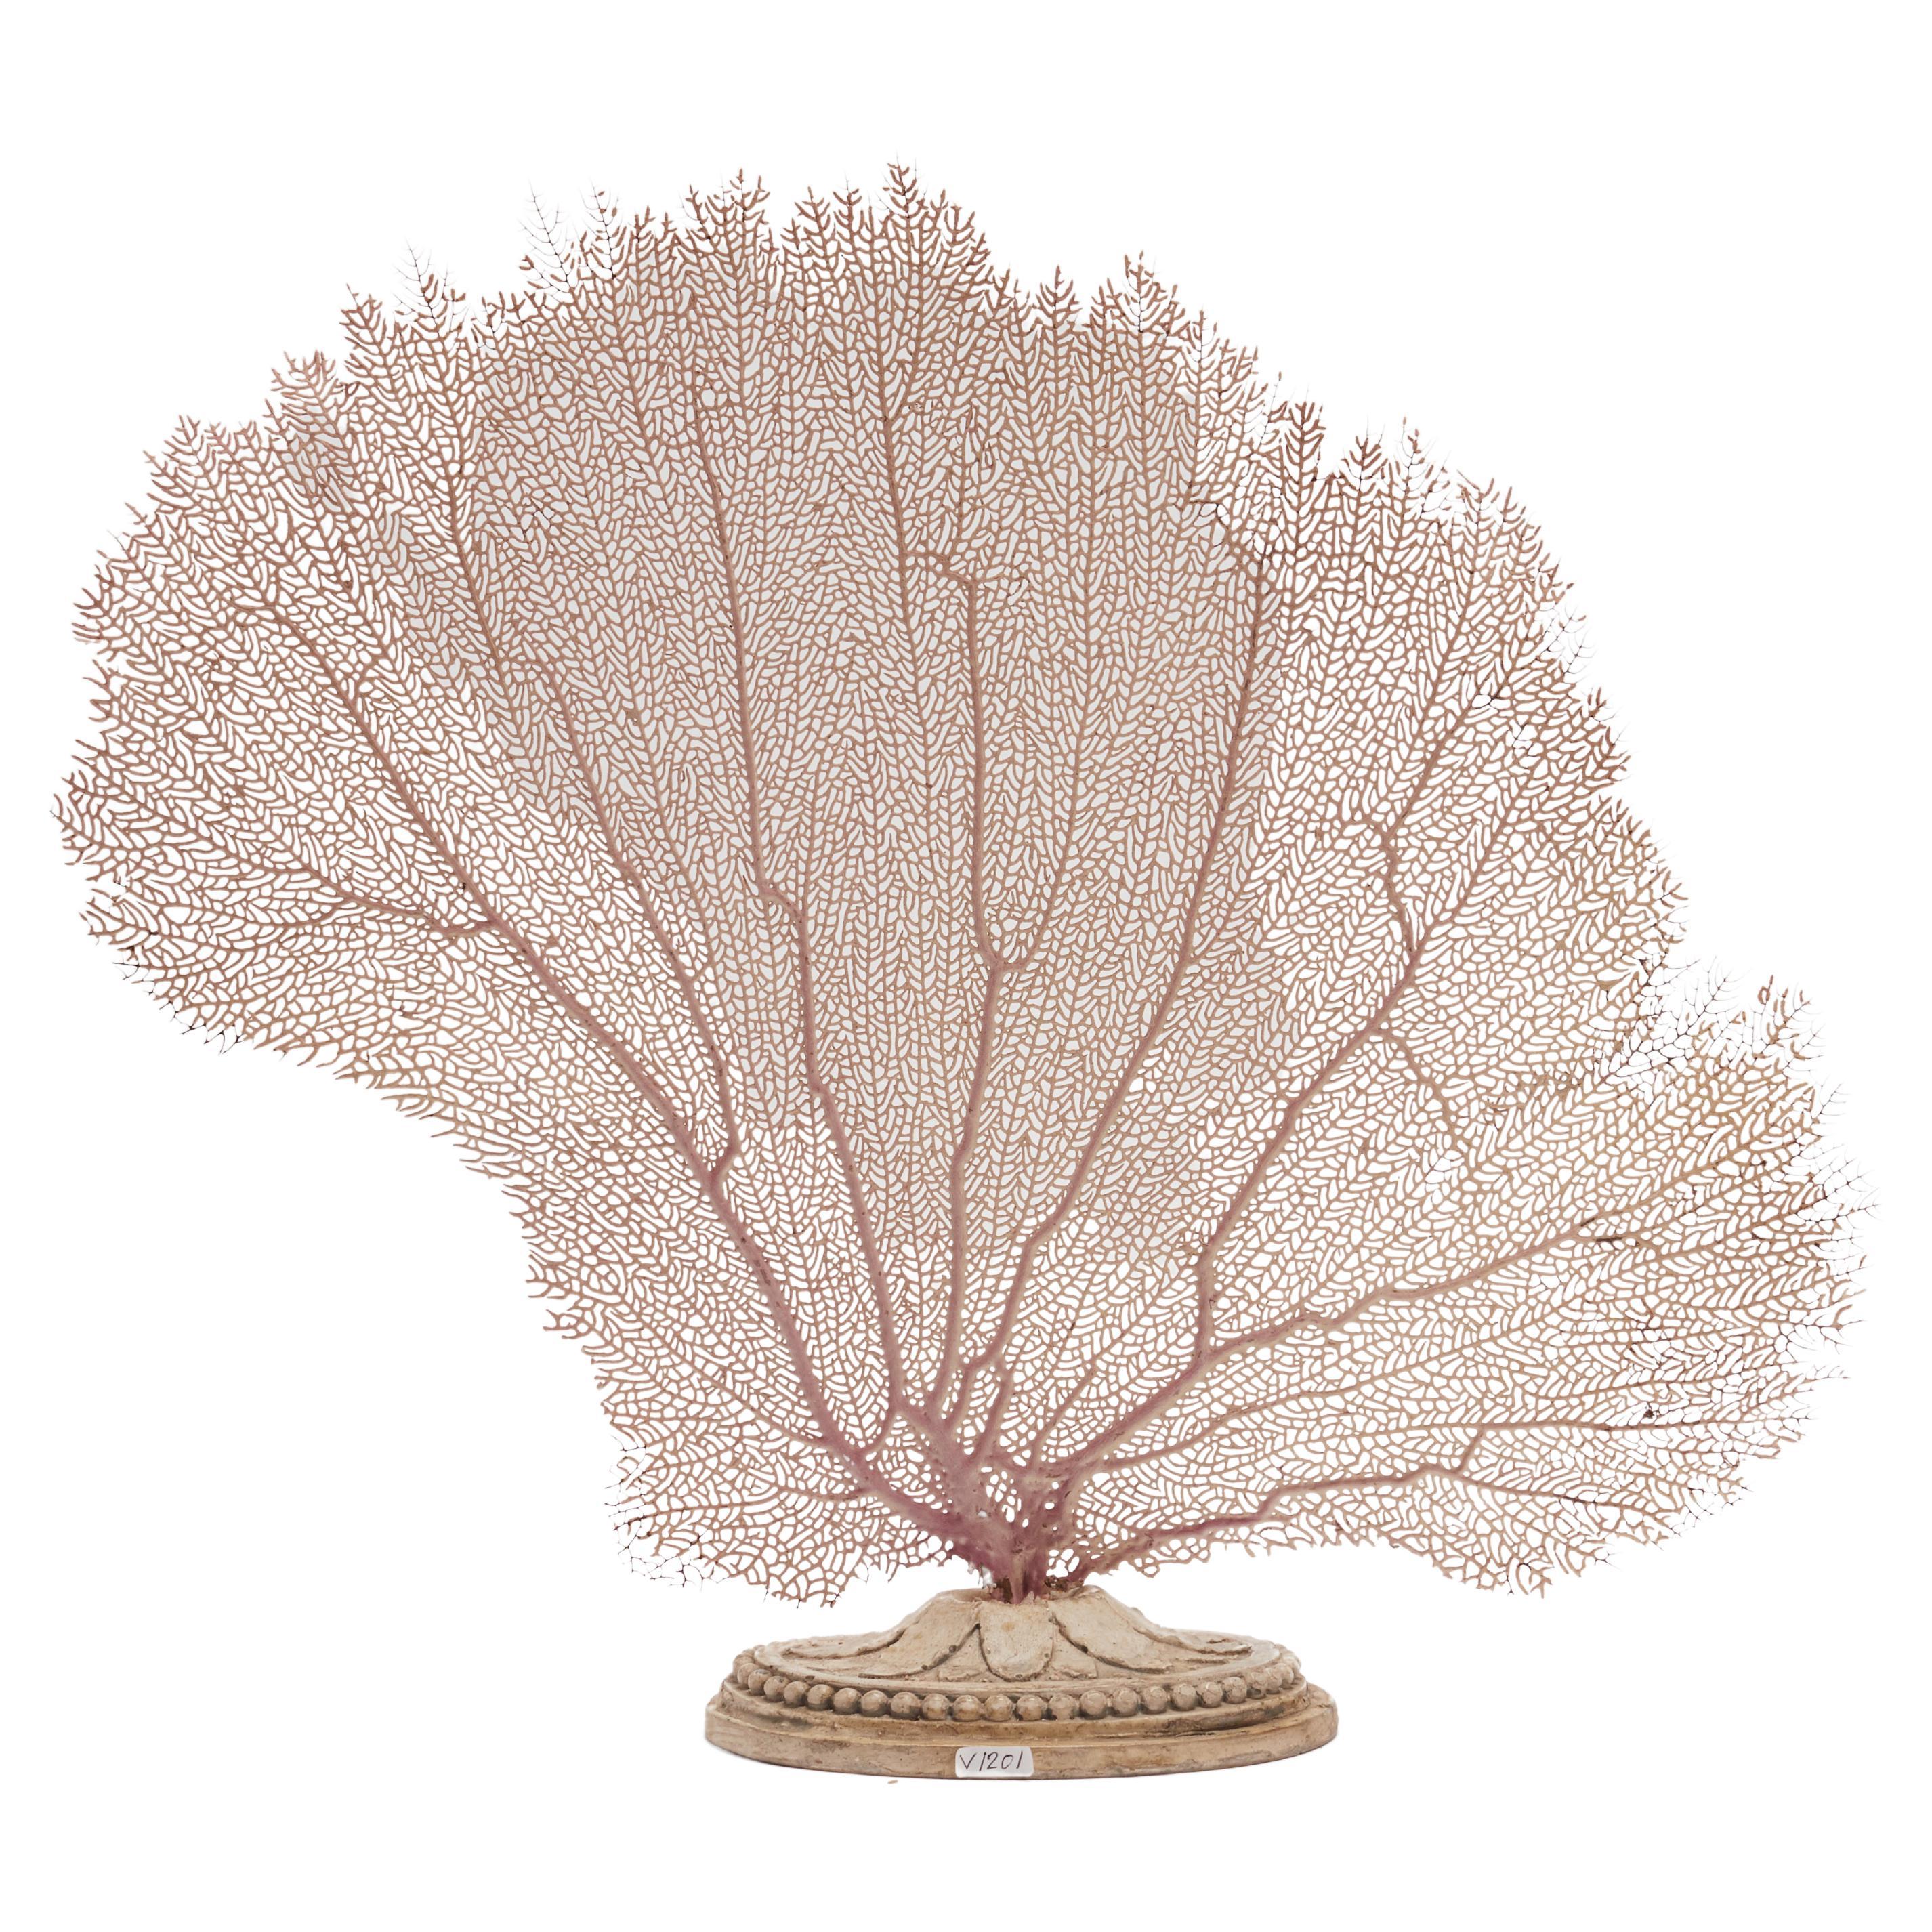 Pair of big branches fan shaped of a pink-purple horny coral from Mediterranean Sea for Wunderkammer. The plinths are made out of carved wood and cream painted chalk. Italy circa 1880.